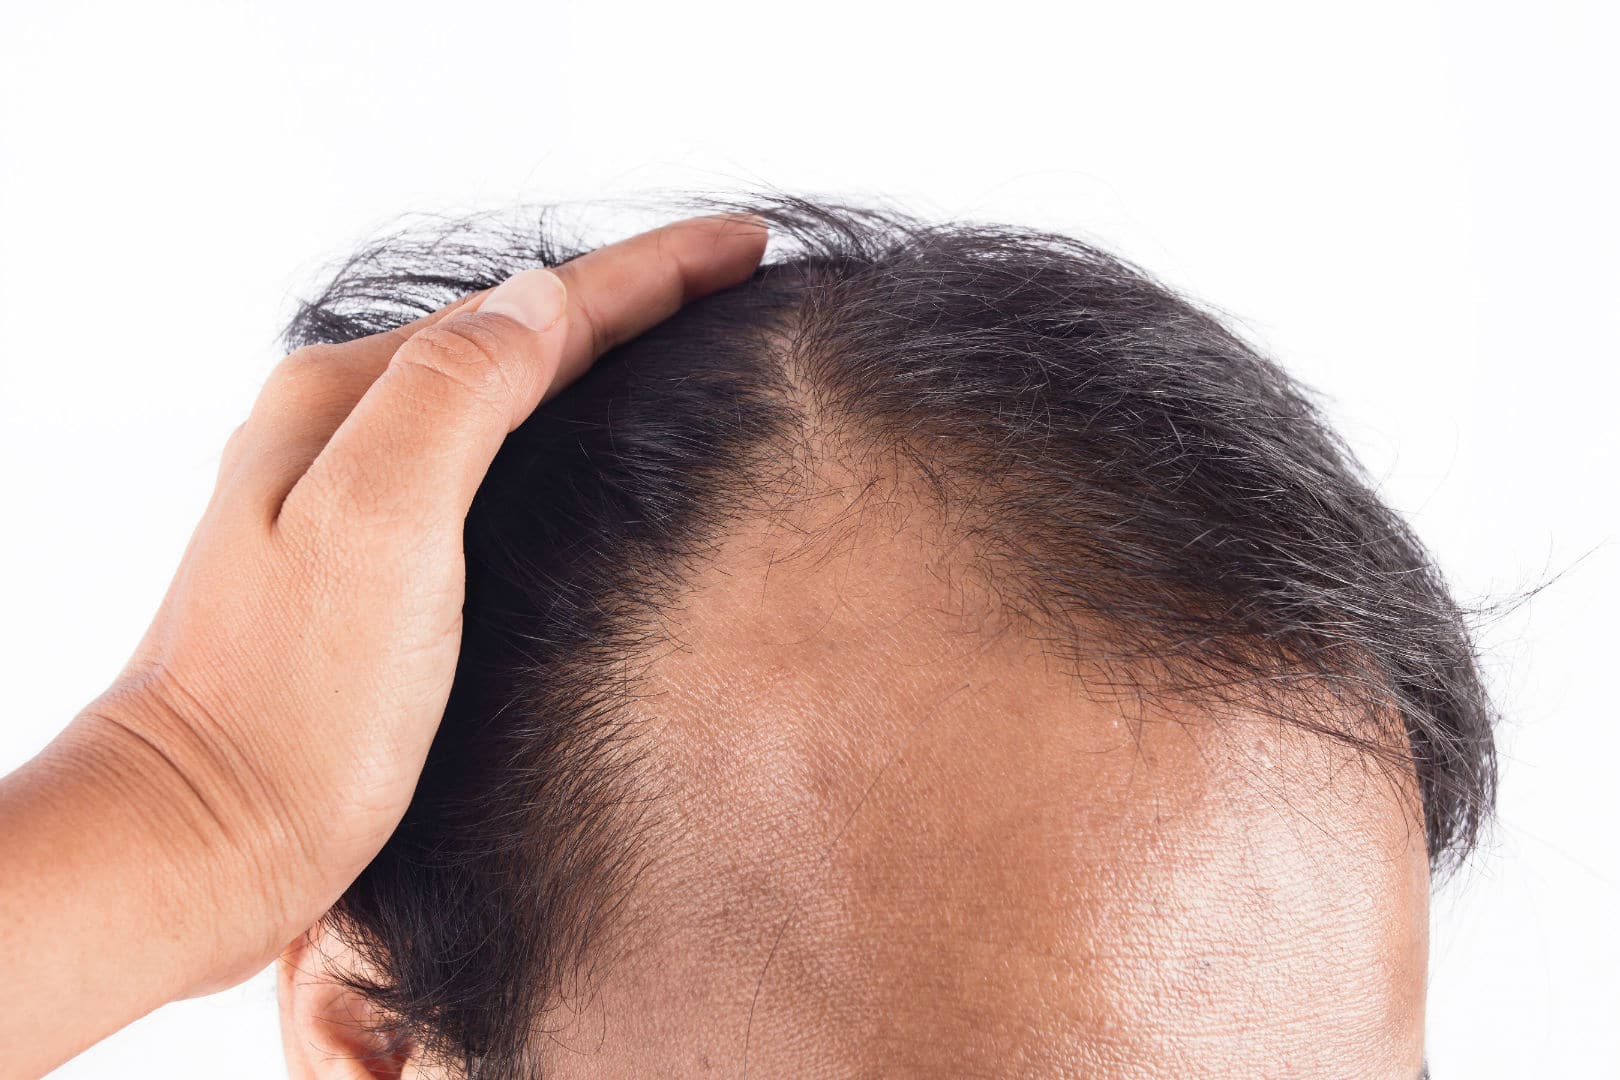 Bald Spot on The Back of Head - How to Prevent & Treat Hair Loss